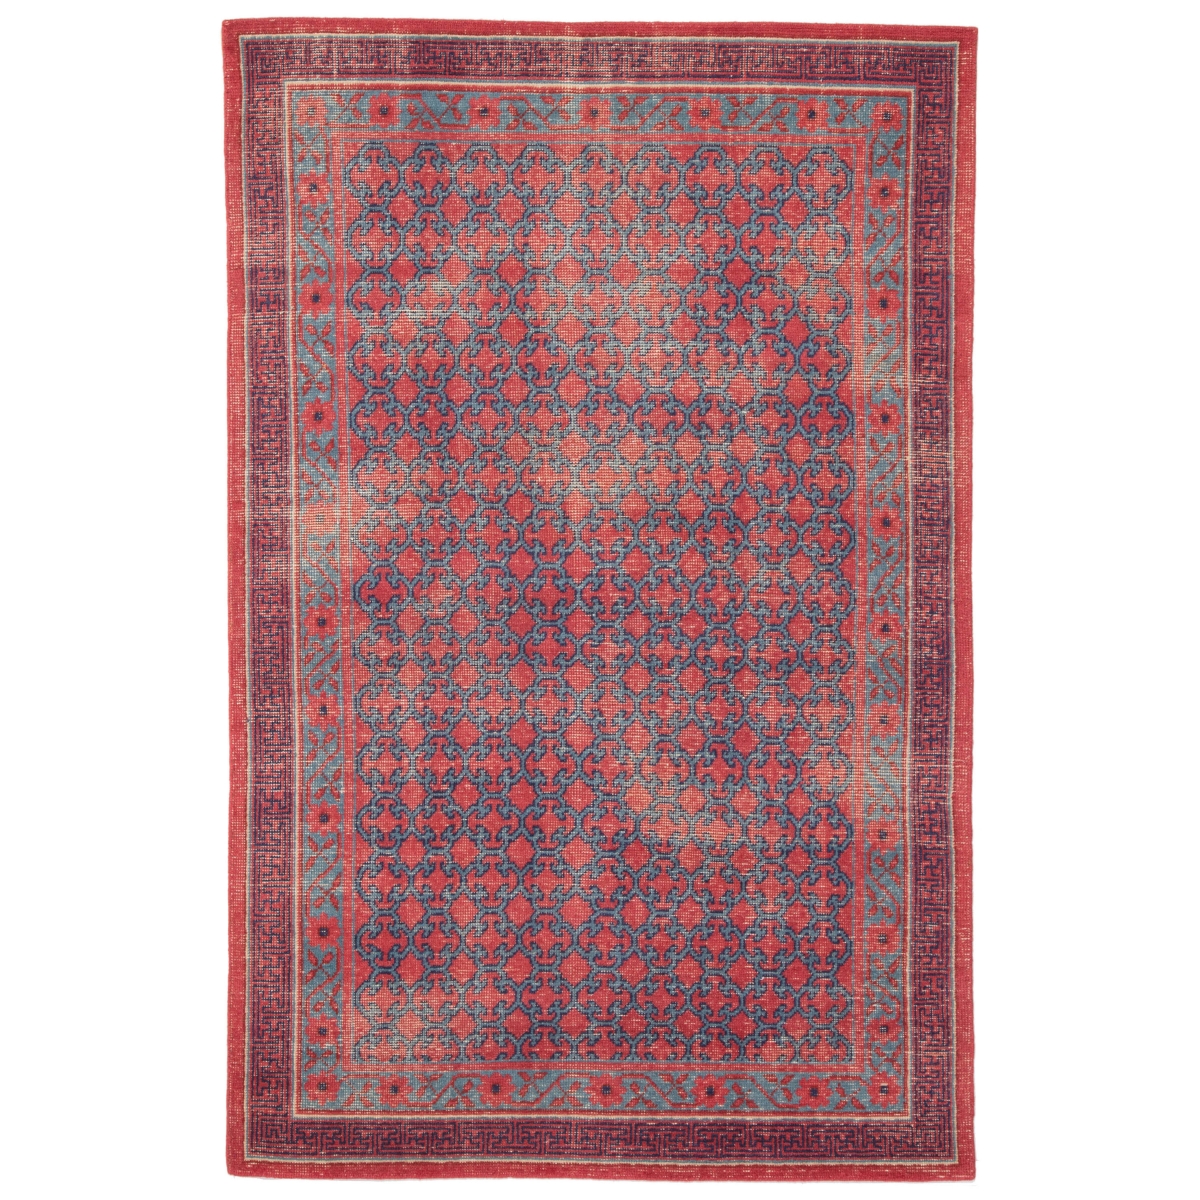 Rug129764 8 X 10 Ft. Revolution Concord Hand-knotted Medallion Red & Blue Area Rug